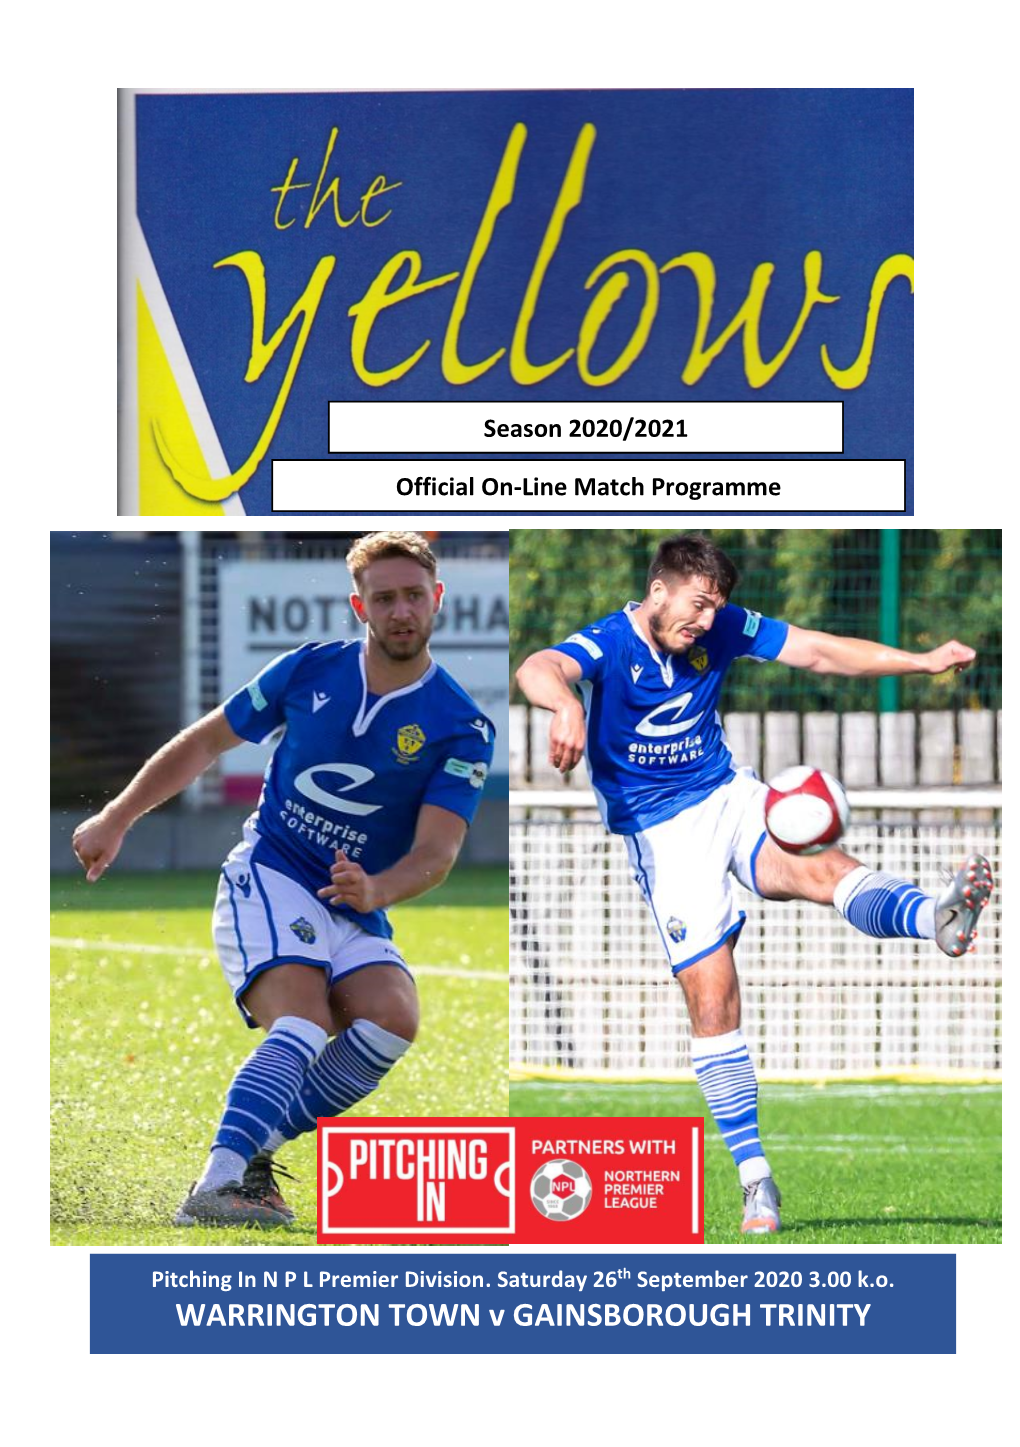 To Download the Online Match Programme for Warrington Town V Gainsborough Trinity